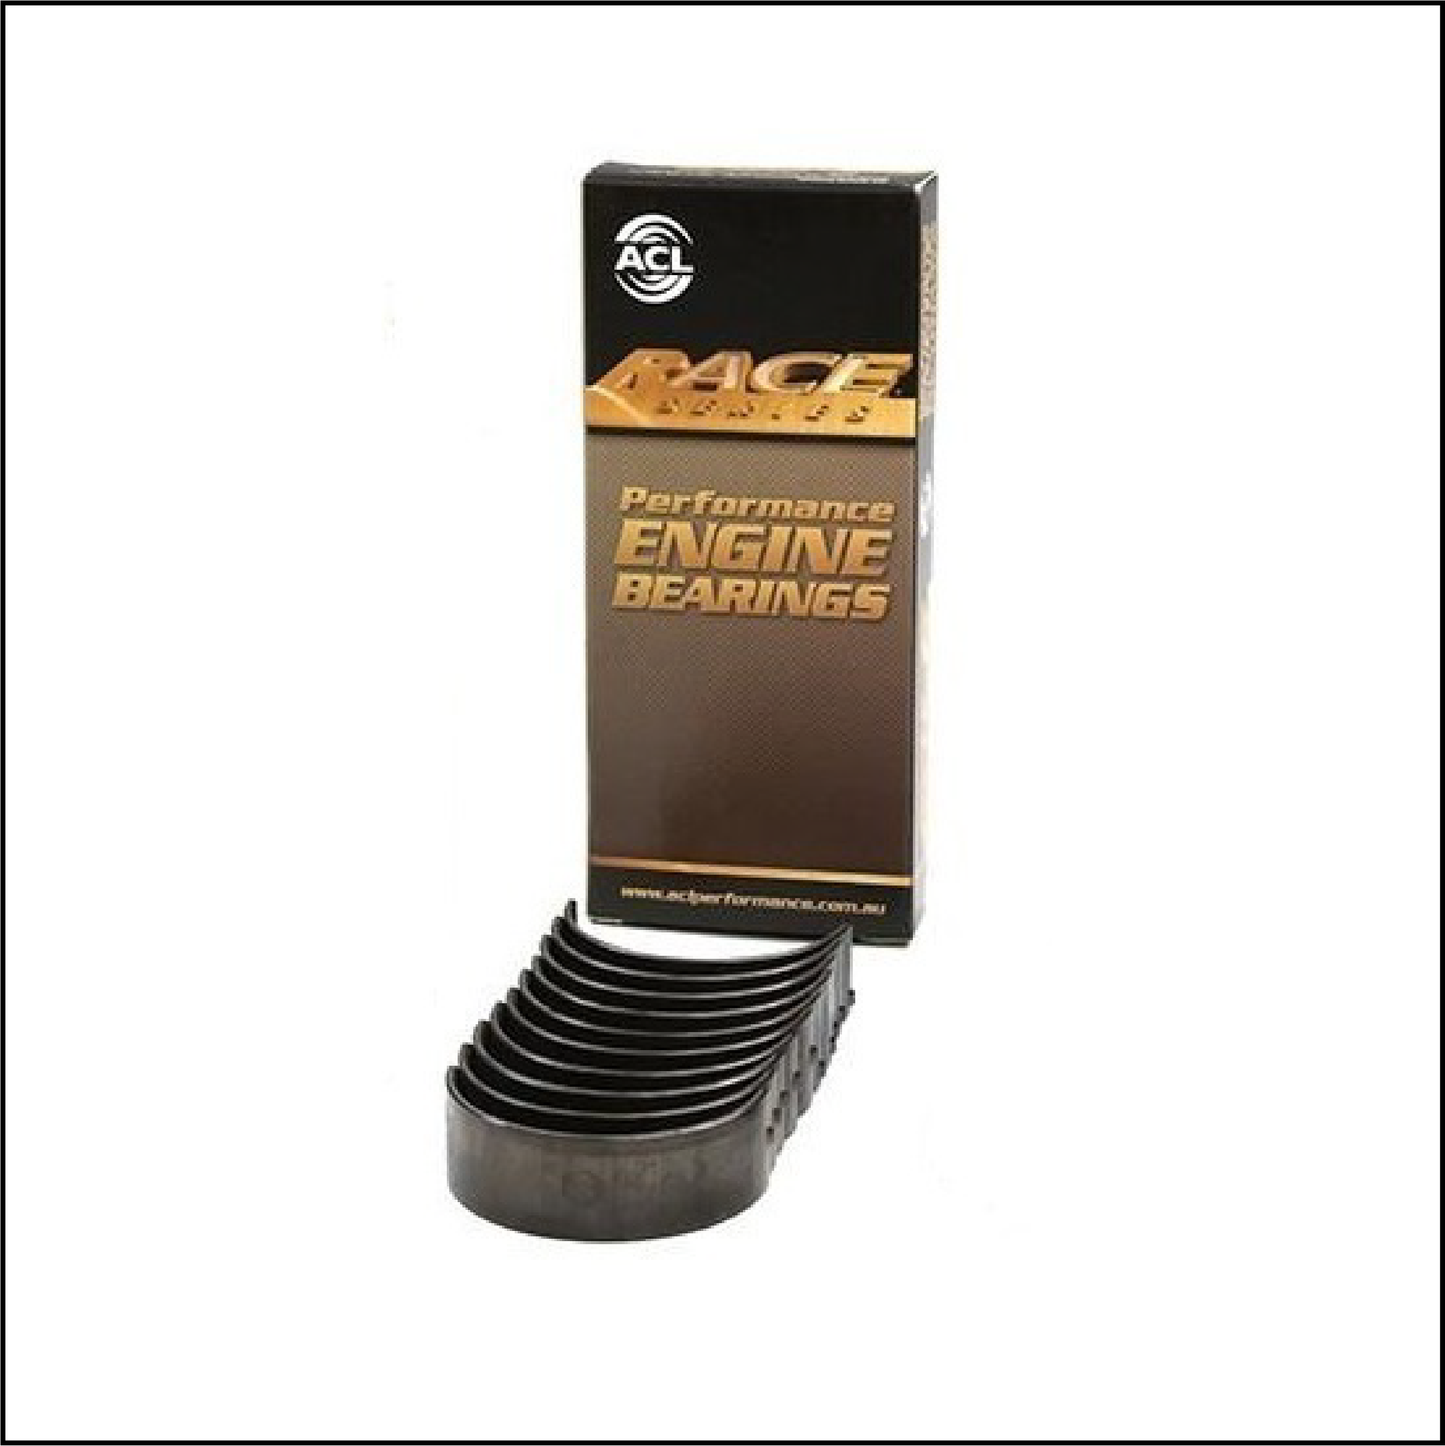 ACL Race Bearings [Mains] for 2JZGE, 2JZGTE, and 1JZGTE Toyota Engines